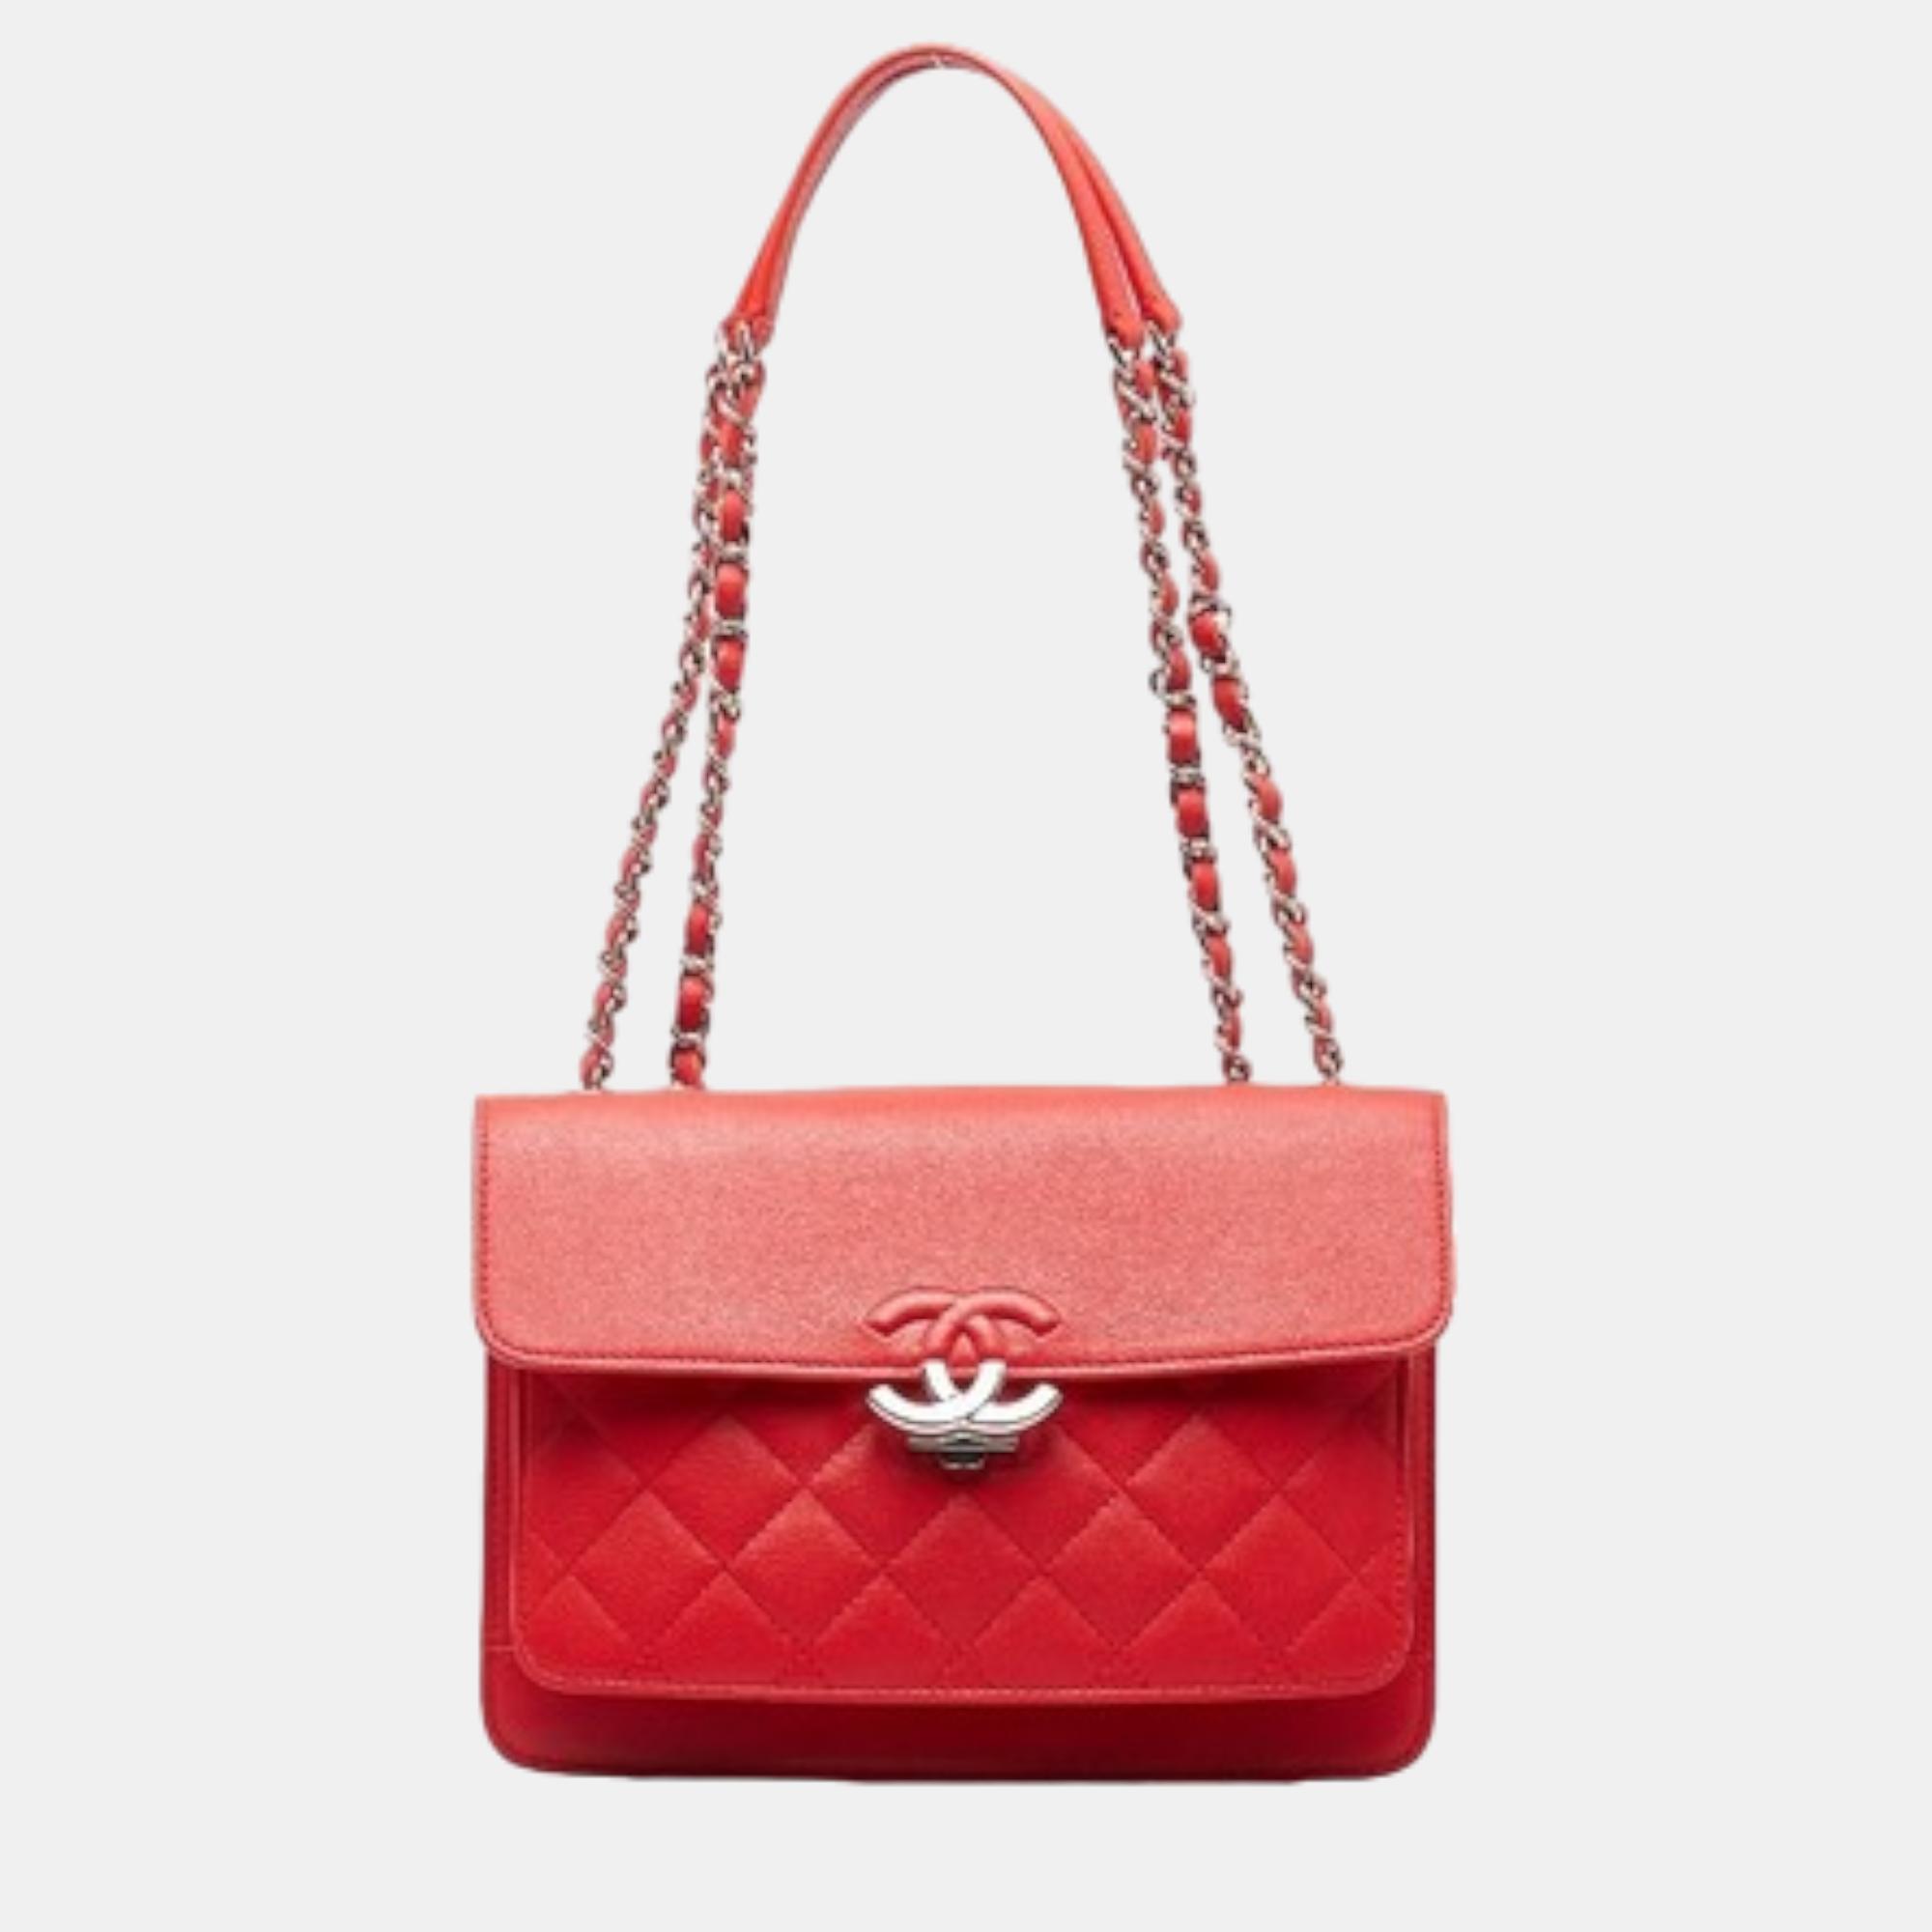 Chanel red cc box flap bag quilted calfskin small shoulder bag